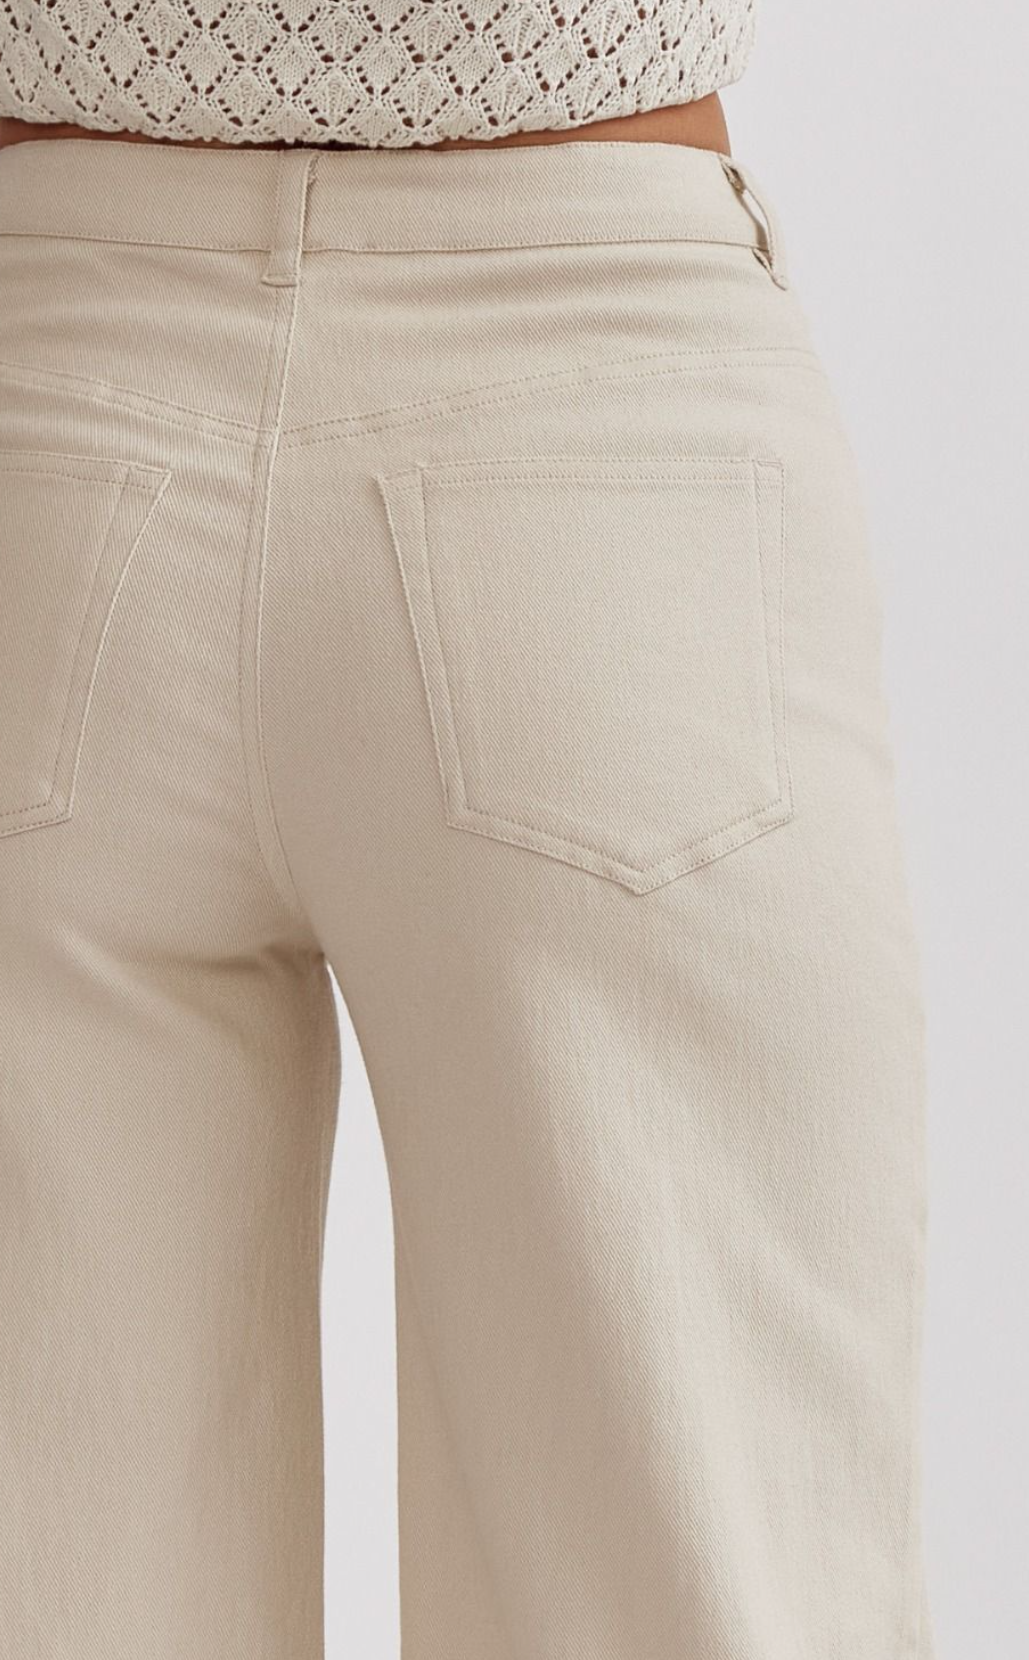 Detail Of The Closure And The Front Pockets Of Pants In Jeans For